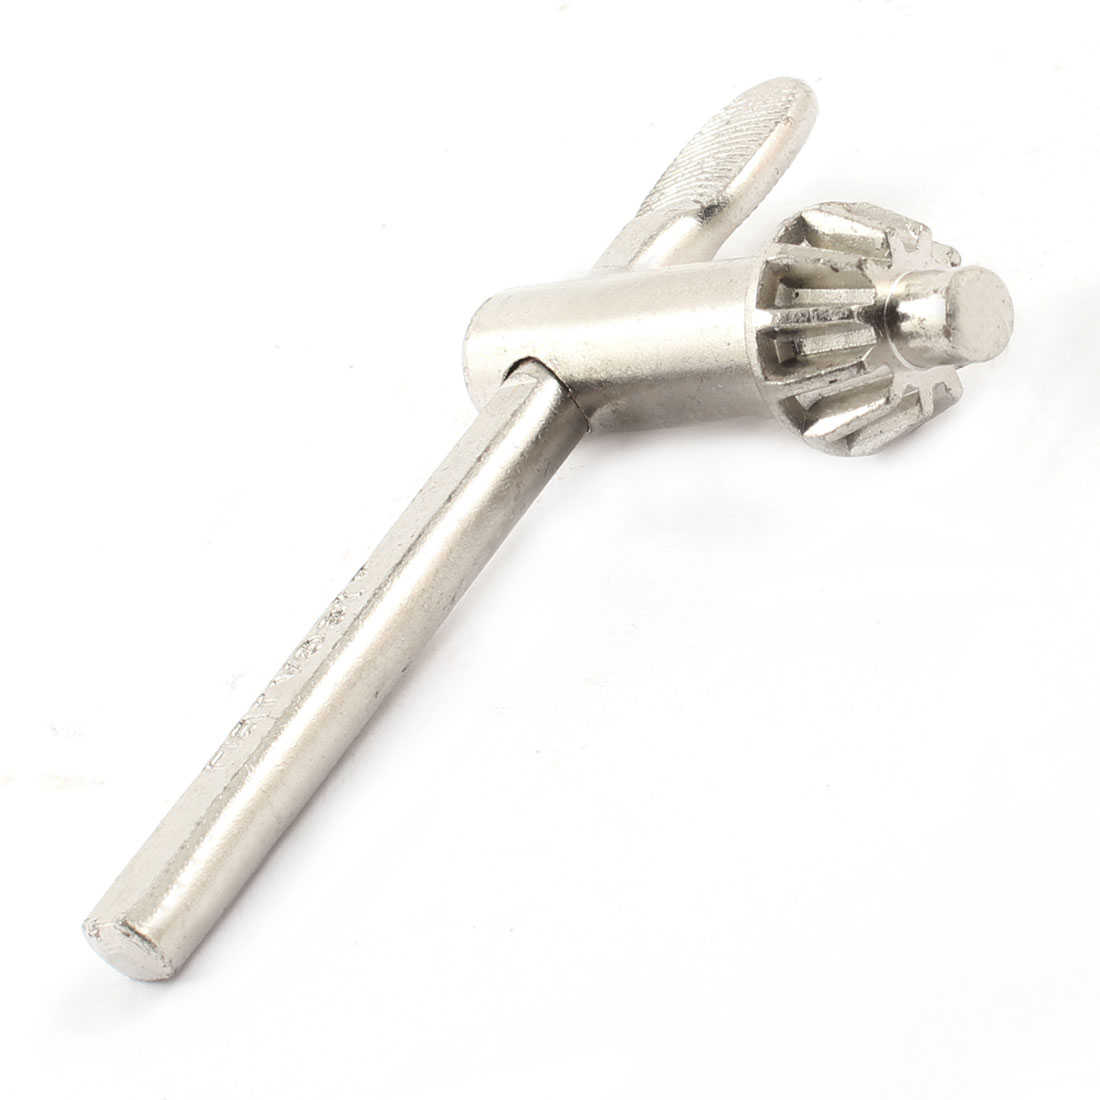 Unique Bargains Industry Equipment Geared 8mm Pilot Size Drill Chuck Key Silver Tone